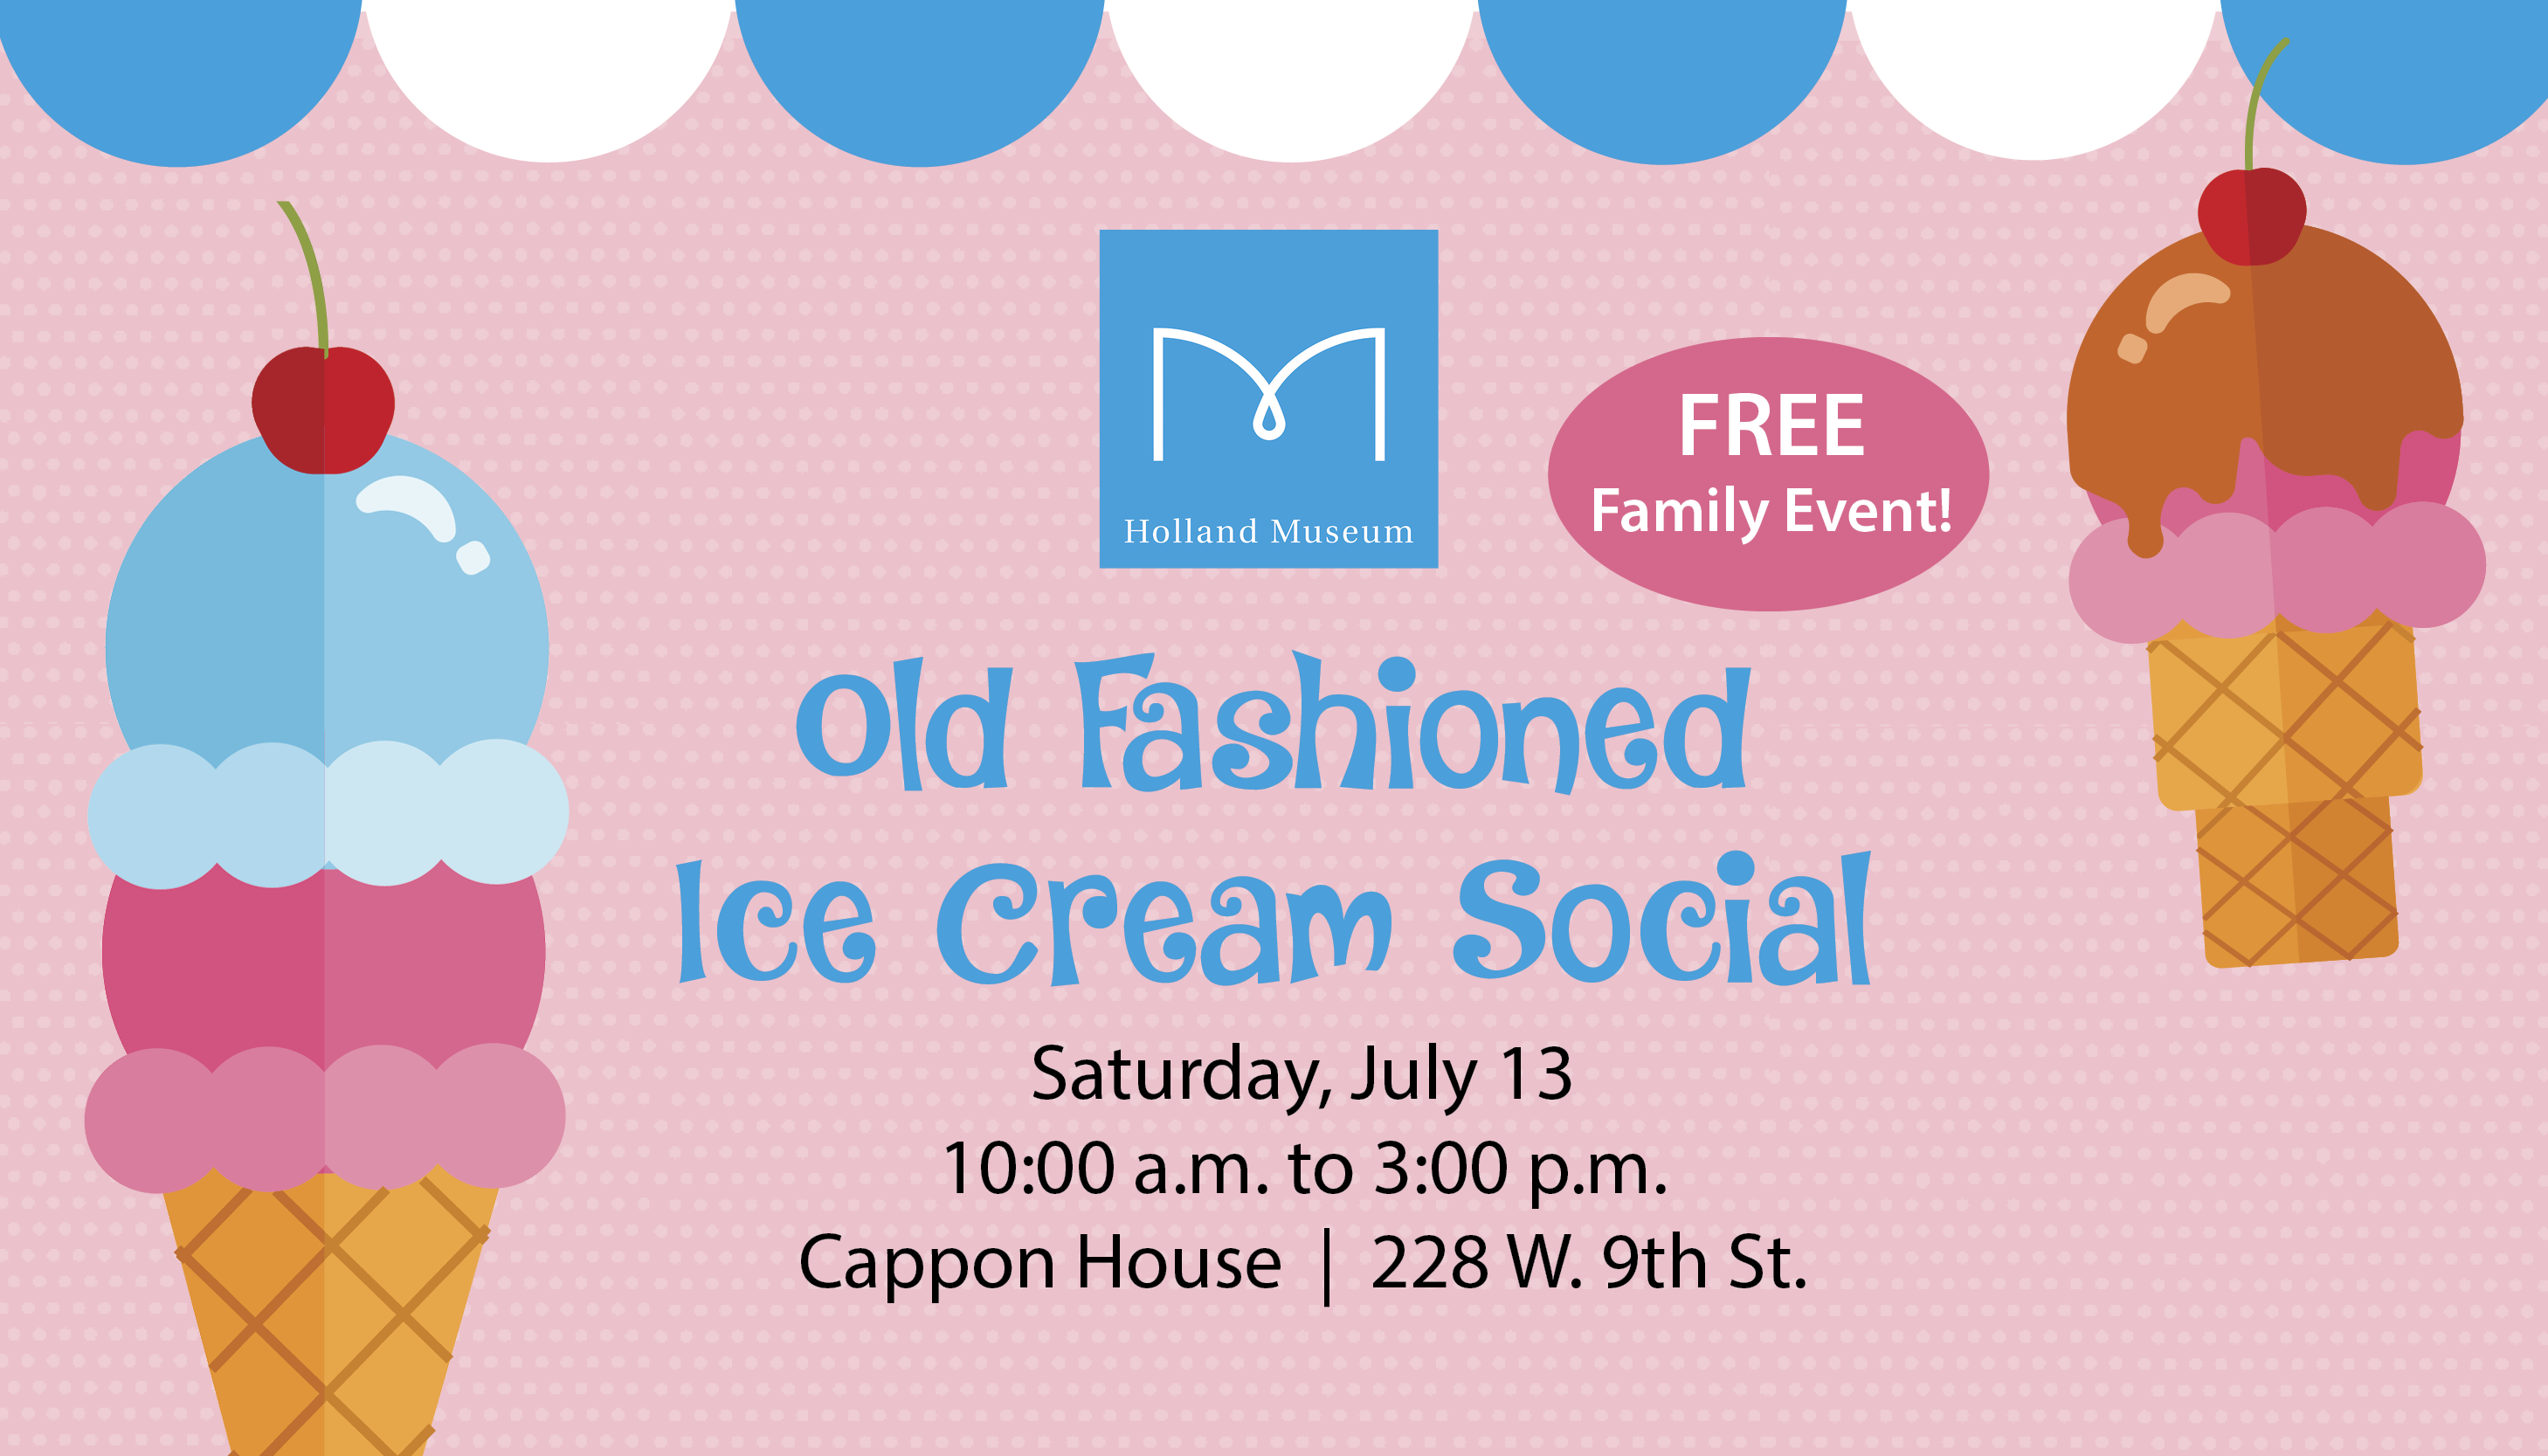 Graphic of the Old Fashioned Ice Cream Social at the Cappon House happening on Saturday, July 13 from 10:00 a.m. to 3:00 p.m.